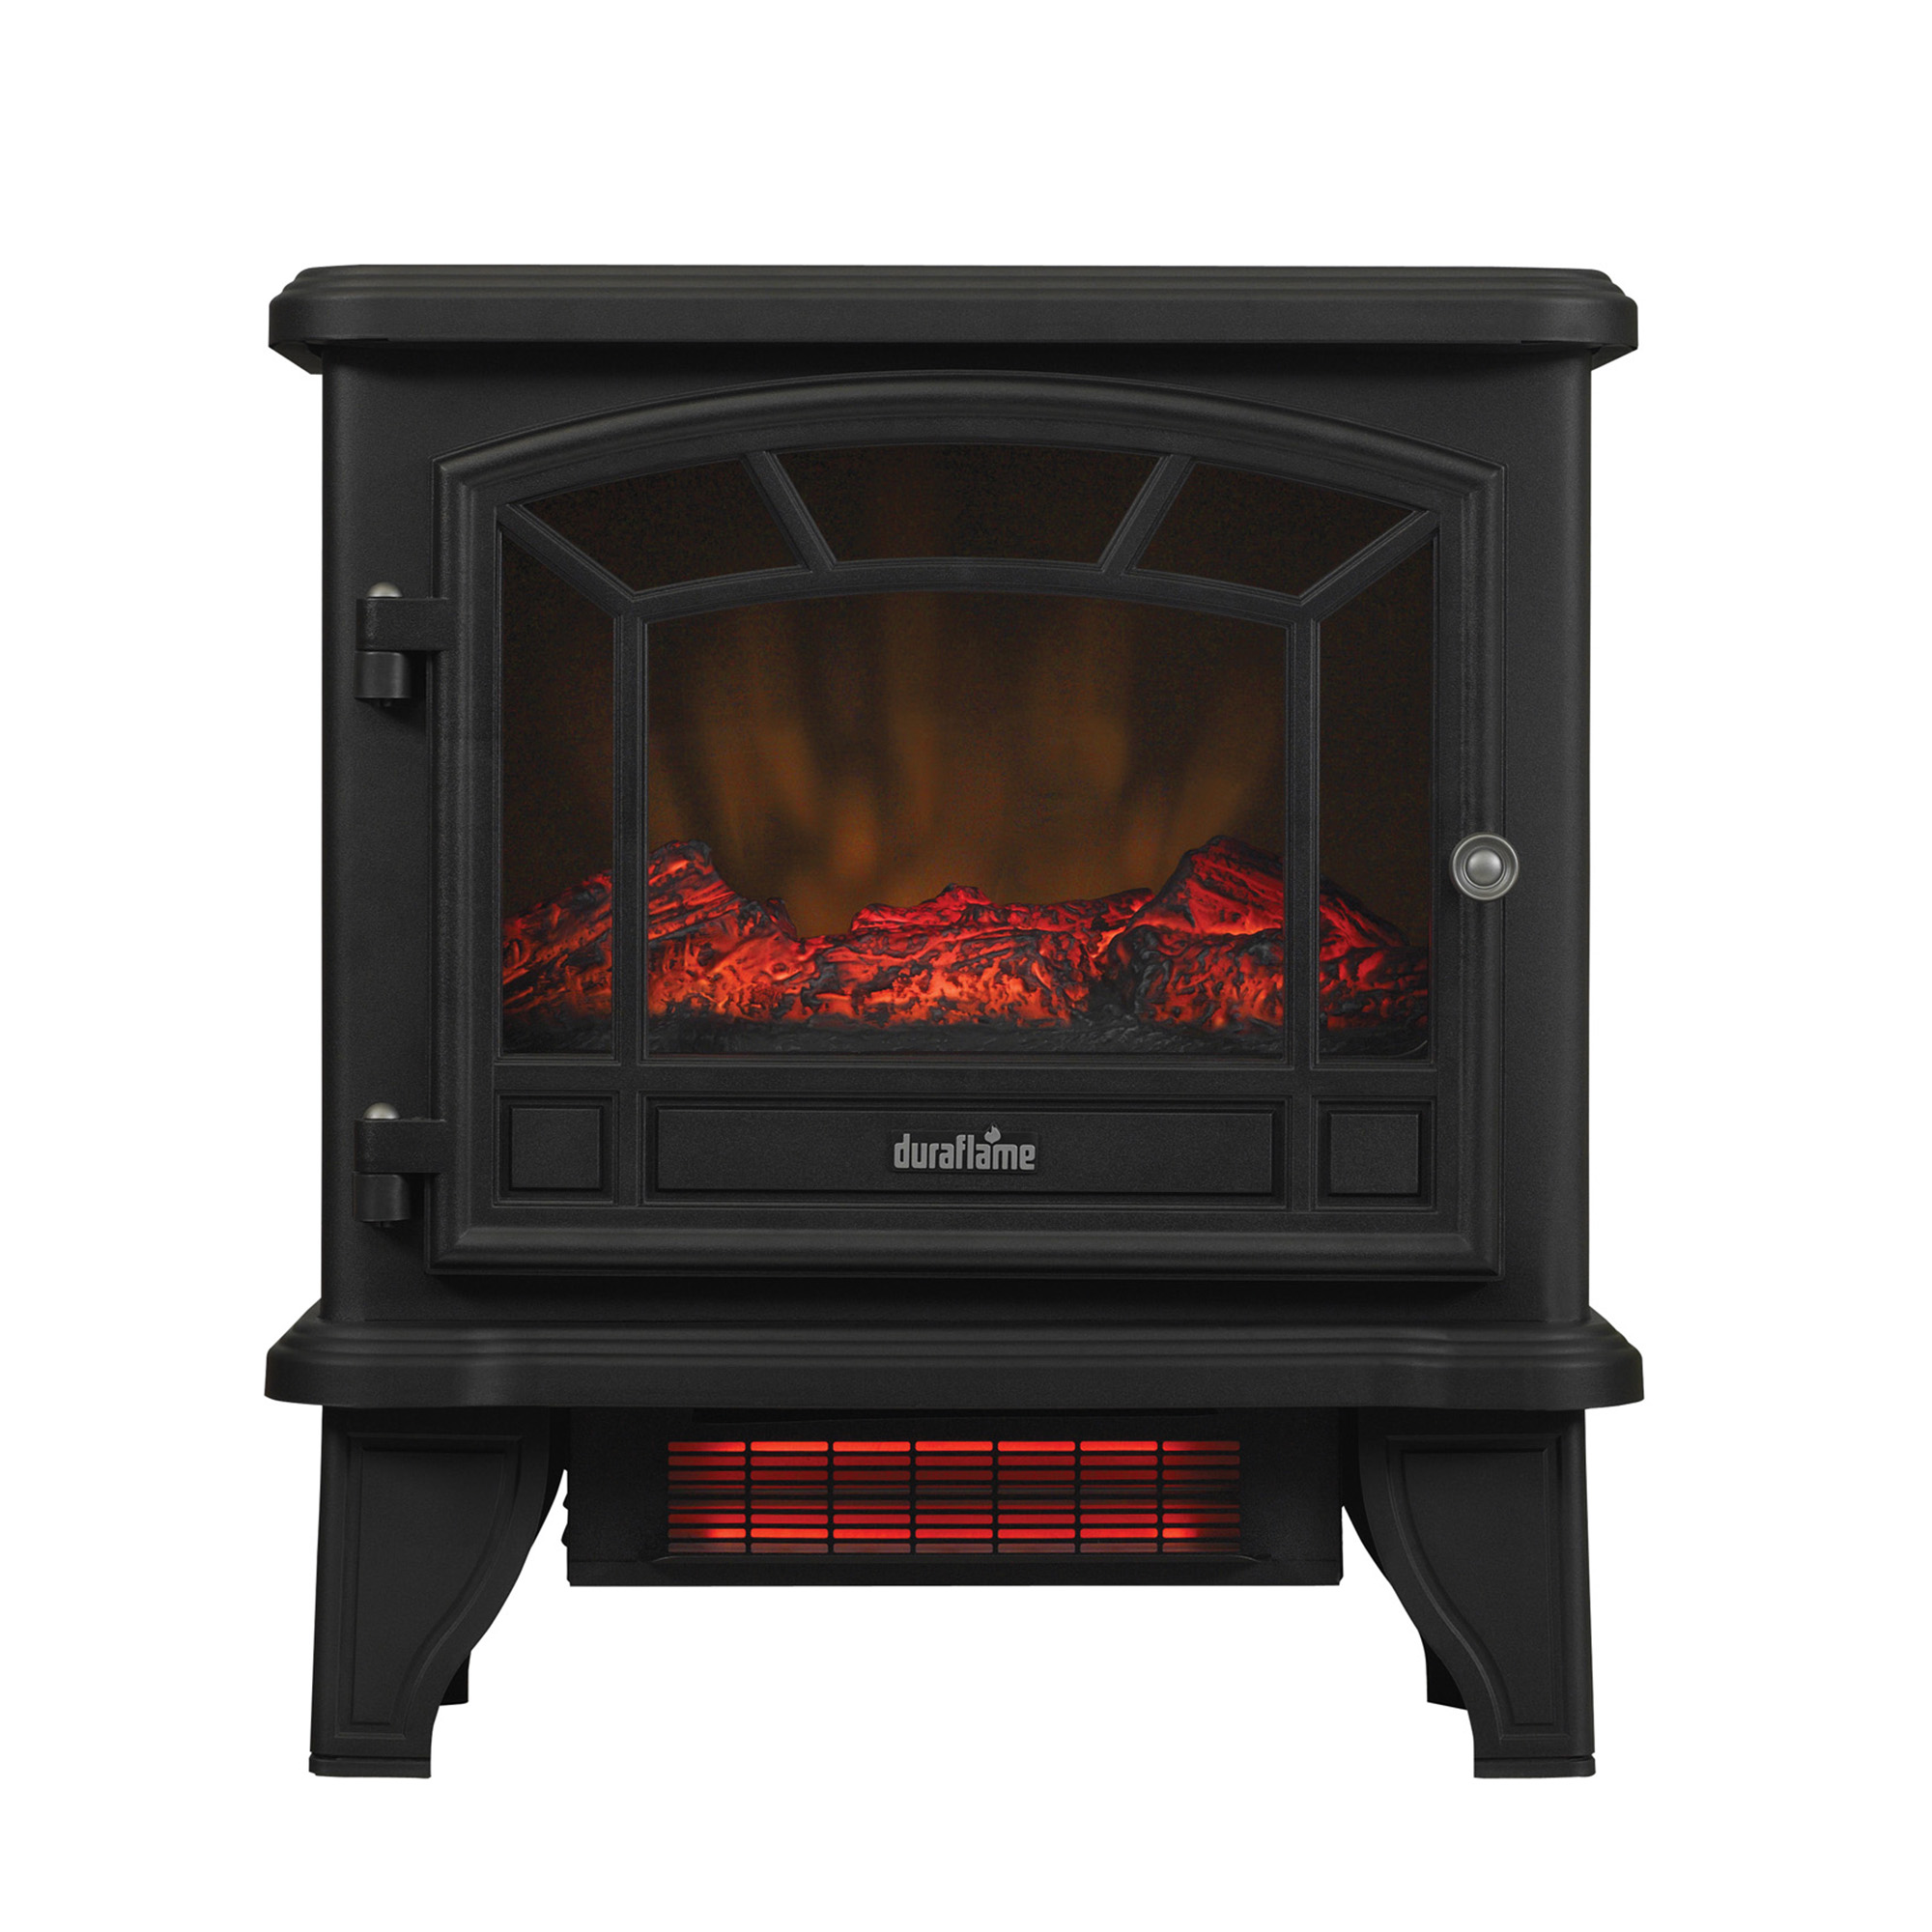 Duraflame 1,000 sq ft Infrared Quartz Electric Fireplace Stove Heater - image 5 of 5